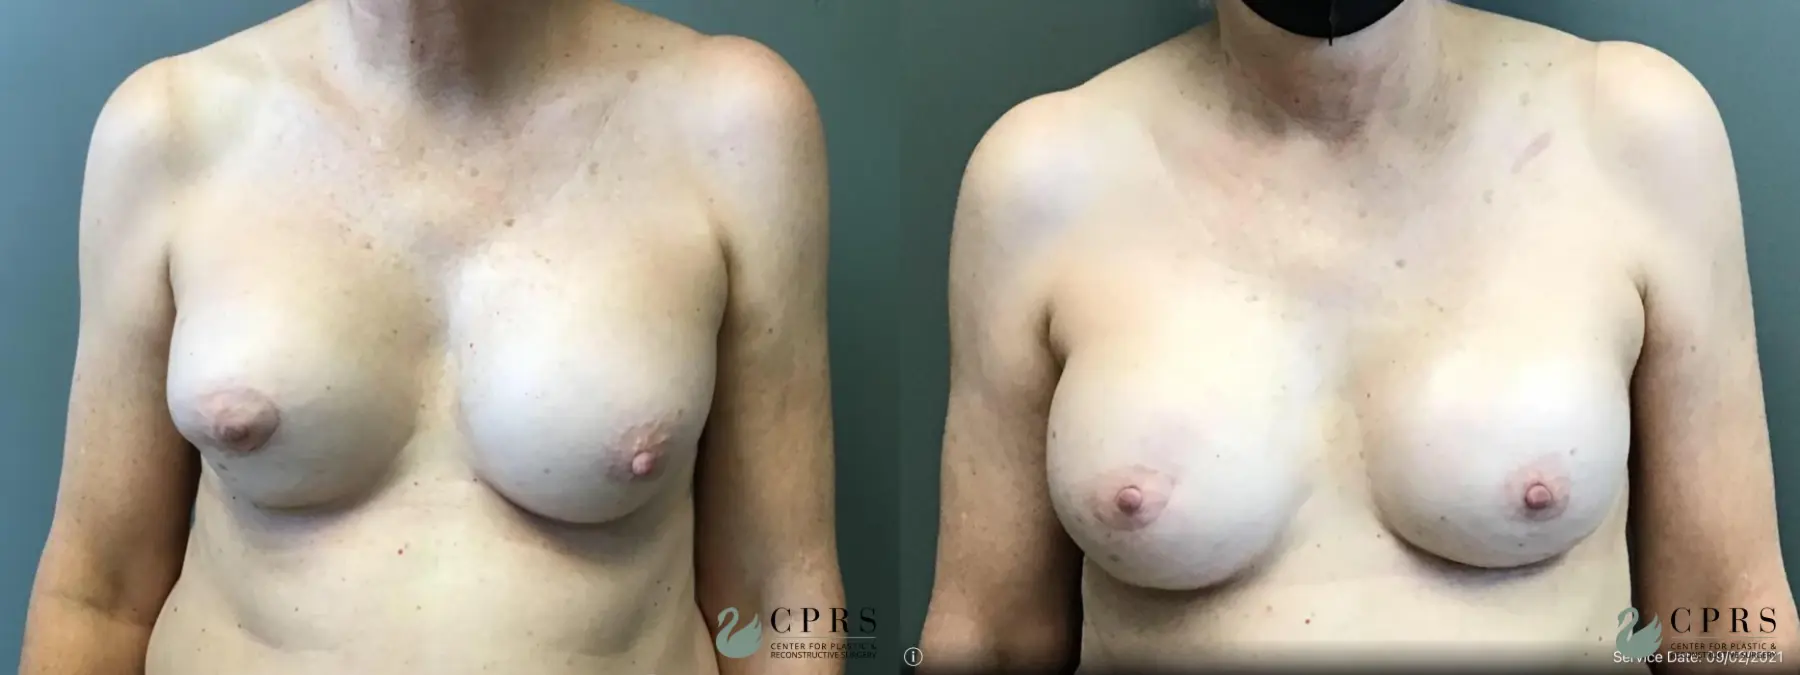 Breast Reconstruction: Patient 7 - Before and After 1